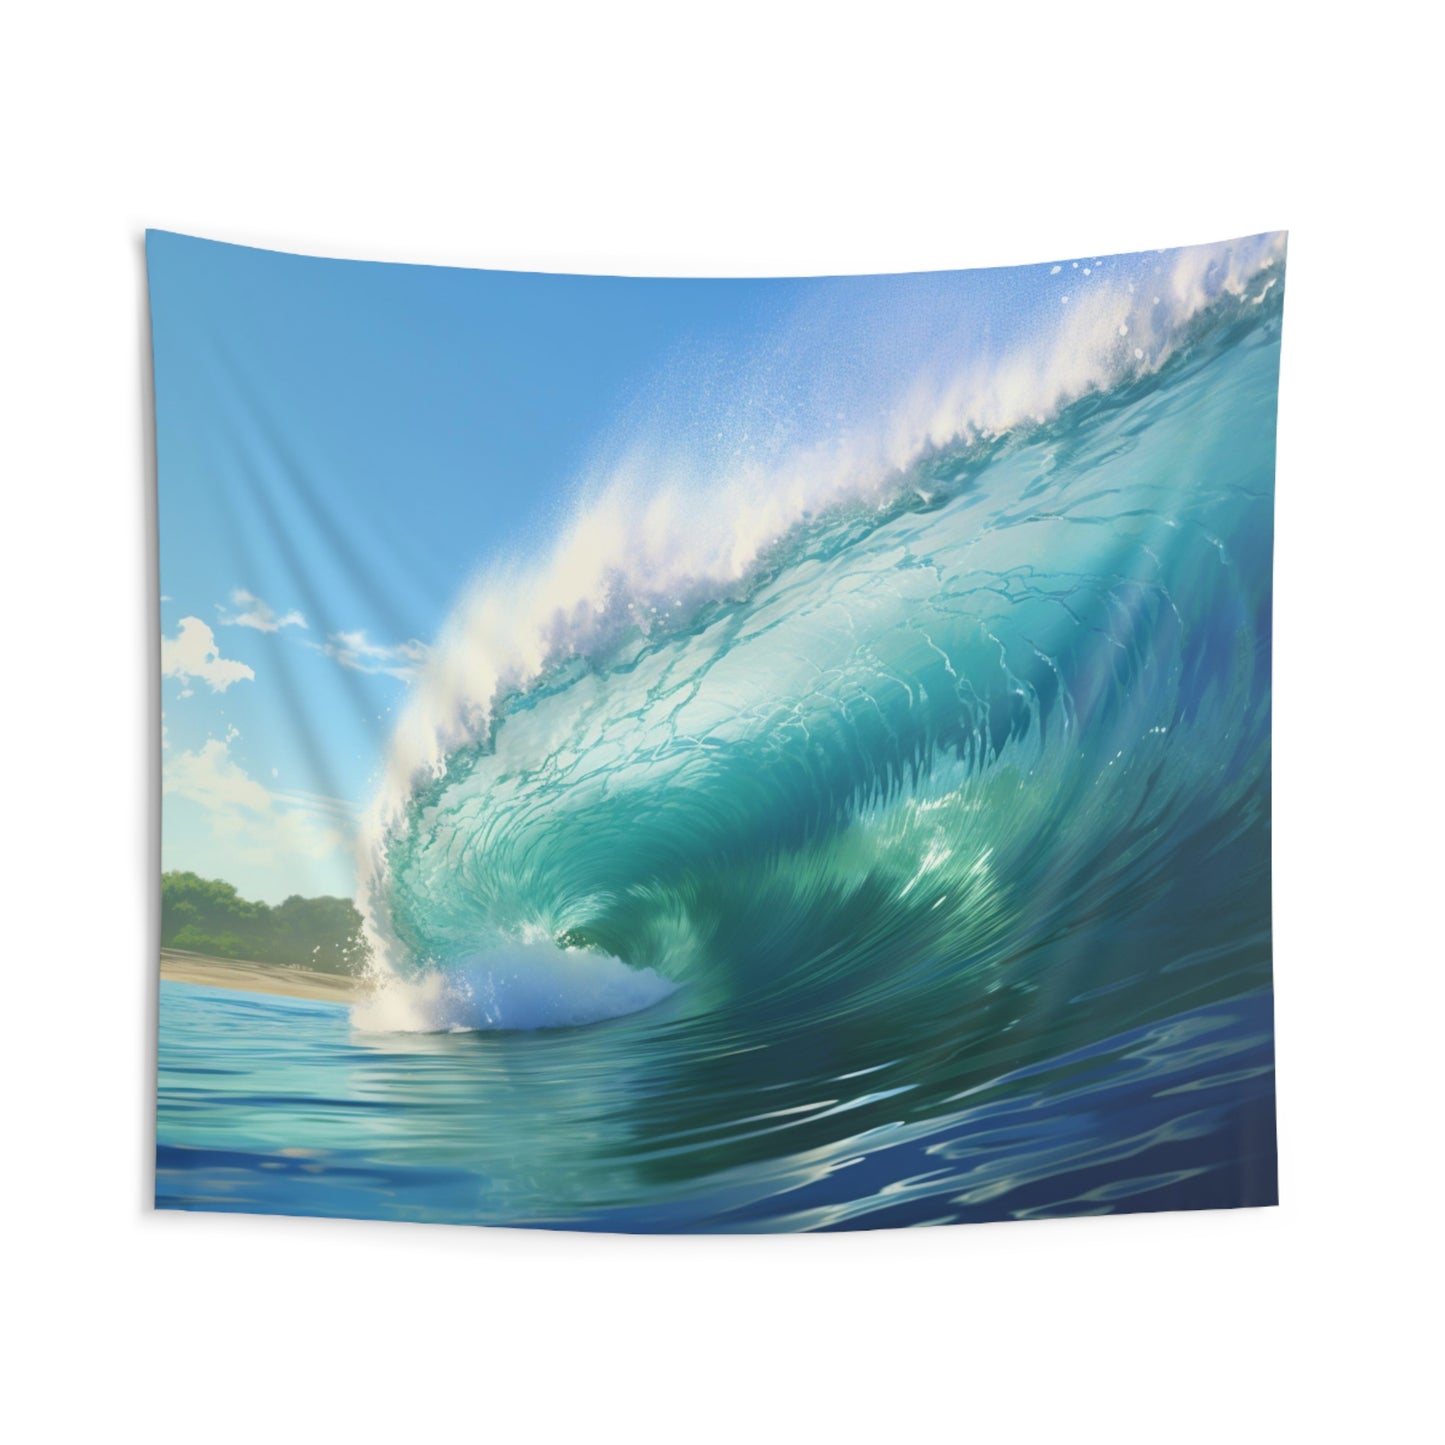 Barrel Wave Tapestry, Ocean Tropical Surf Wall Art Hanging Landscape Indoor Aesthetic Large Small Decor Bedroom College Dorm Room Starcove Fashion